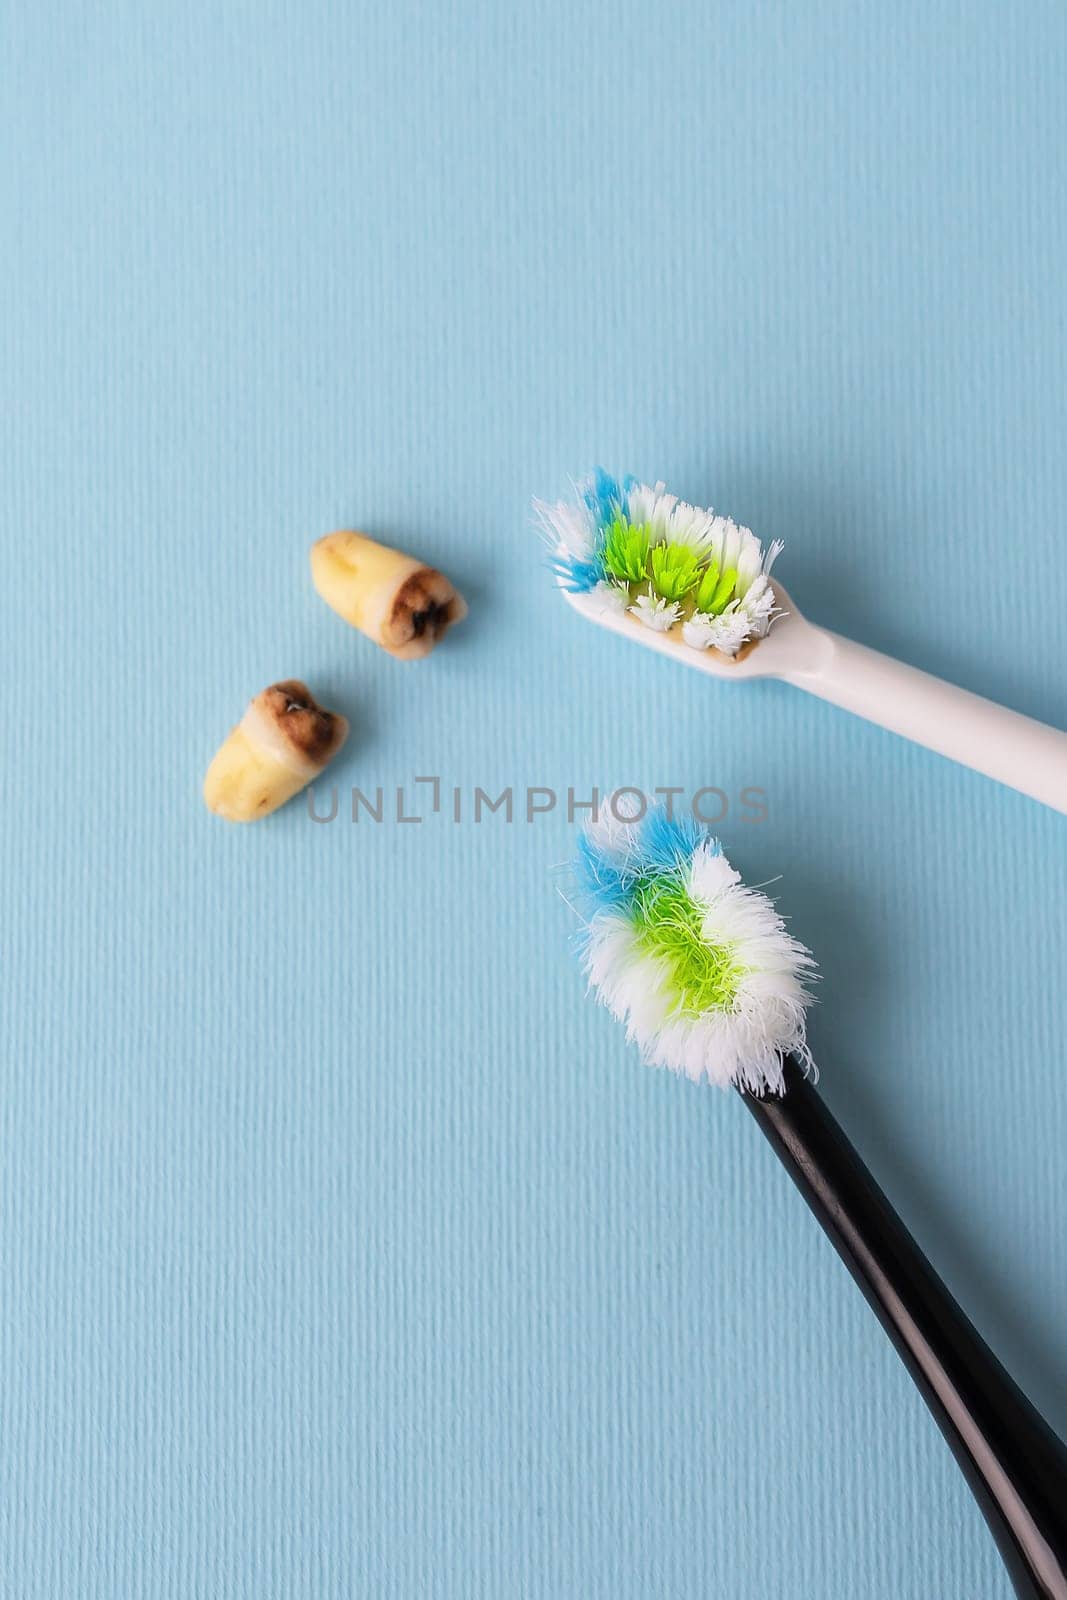 A modern electric toothbrush on a blue background next to extracted wisdom teeth affected by caries. Tooth extraction operation. Hygiene concept for daily care